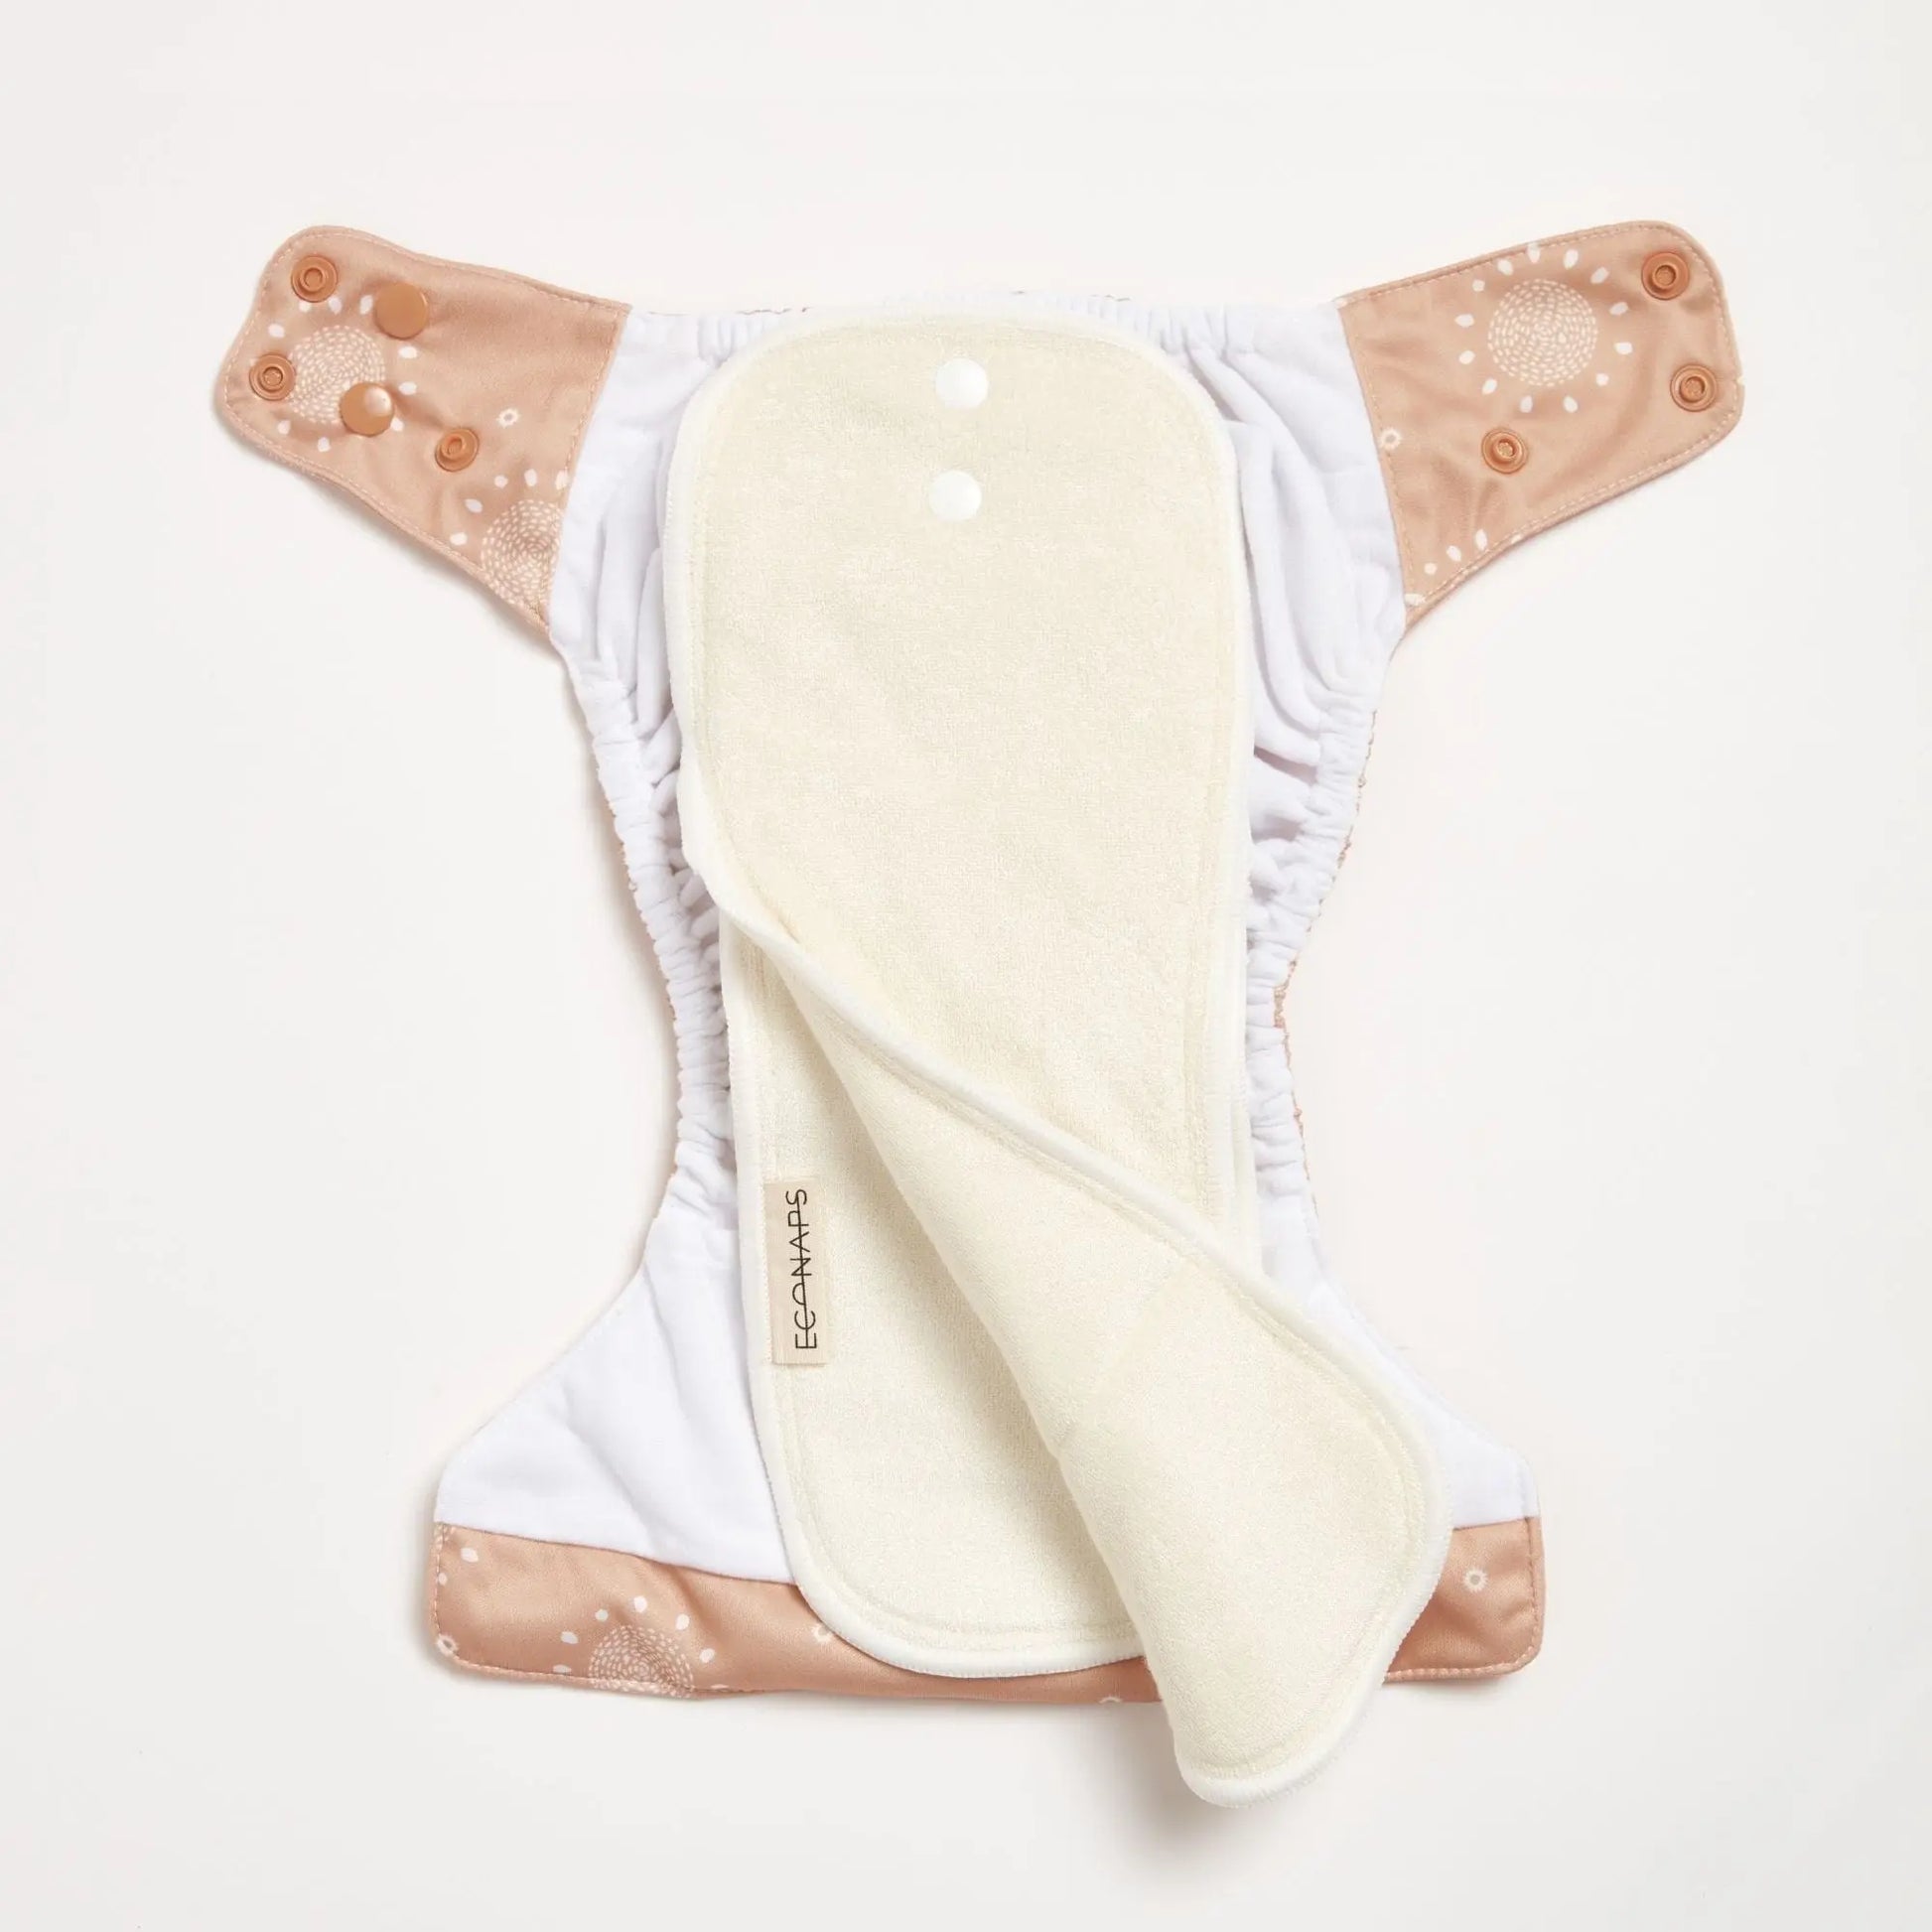  Earth Dreaming Modern Cloth Nappy Econaps 34.95